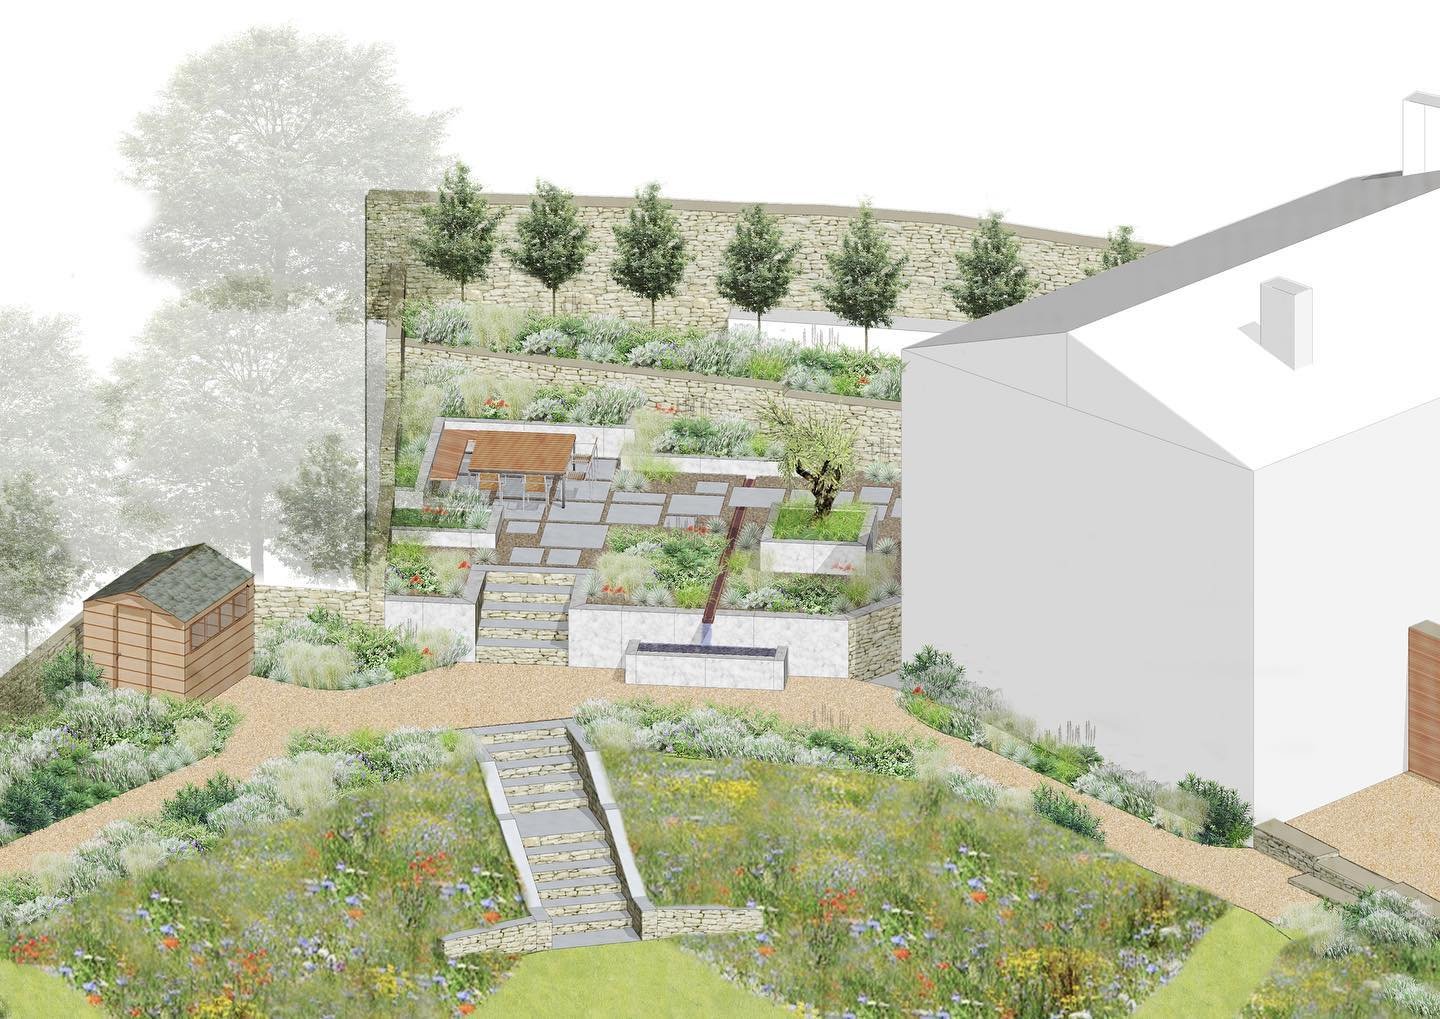 Recent design in development, a total transformation to the upper area in to an immersive gravel garden. Complete with a narrow water rill and large format paving. Lots of awkward walls and levels to contend with but moving along nicely (Designed for